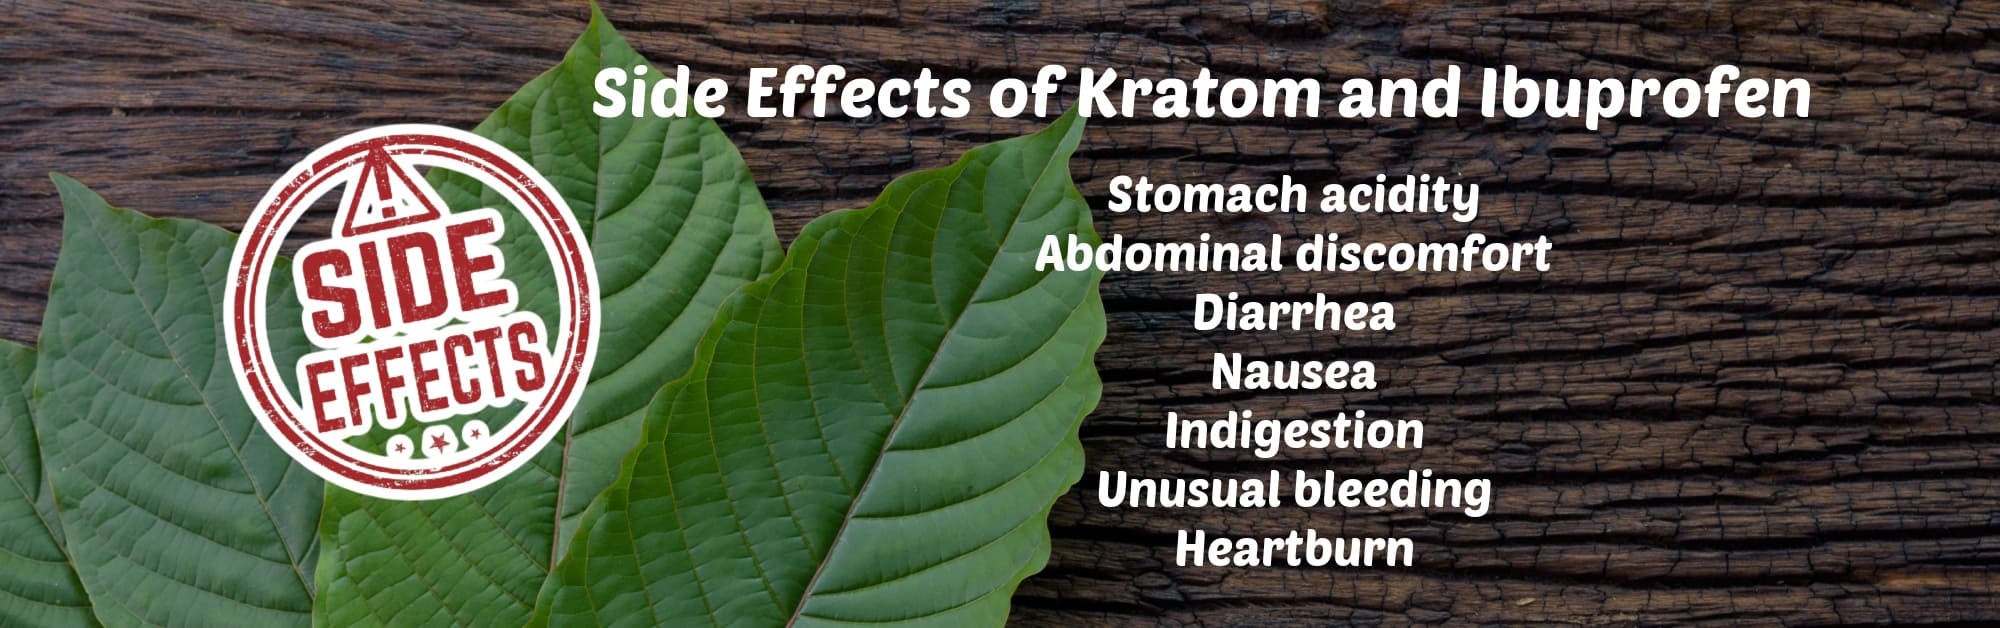 image of kratom and ibuprofen side effects